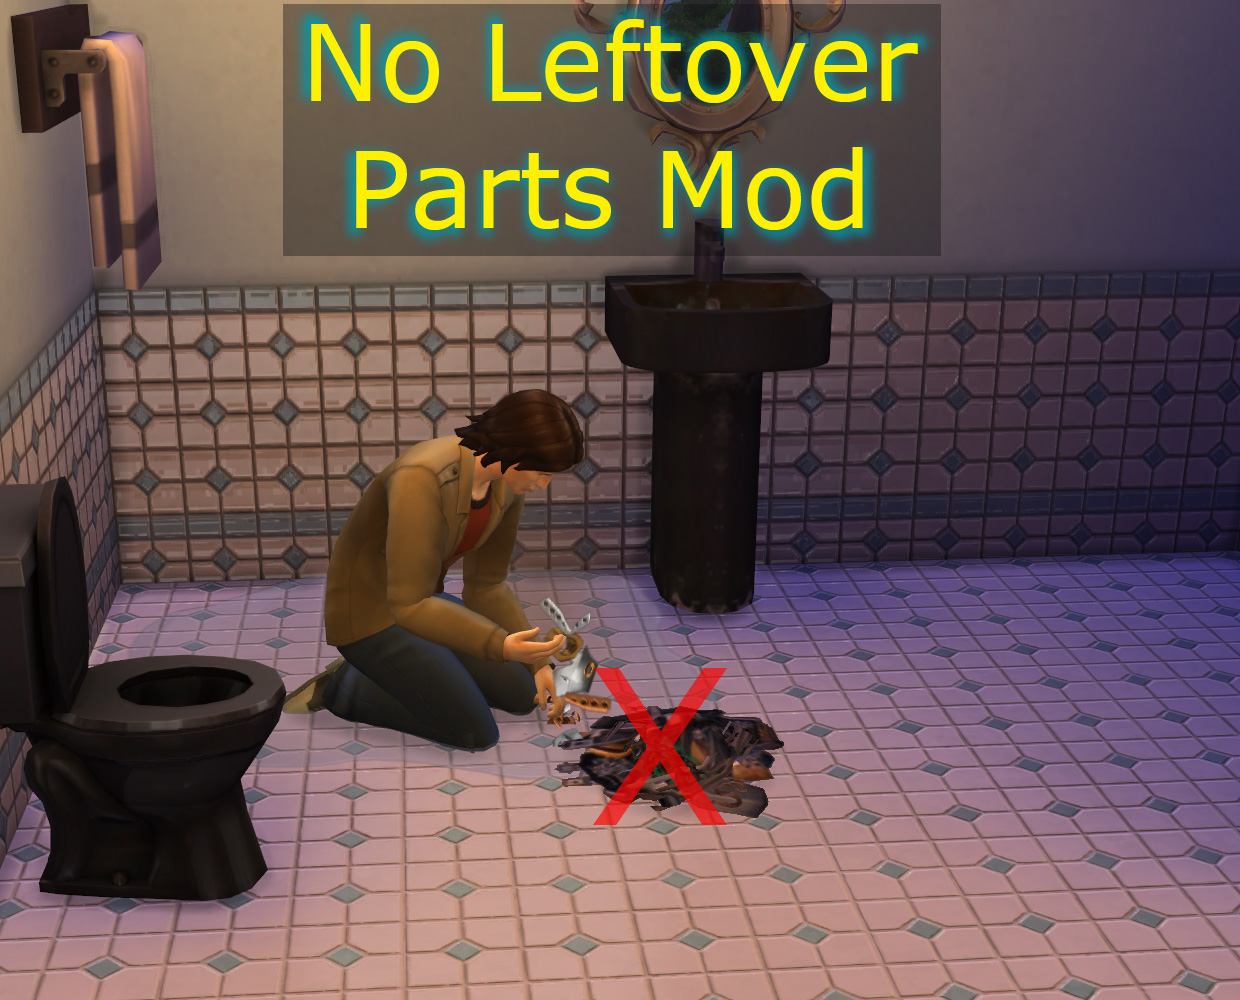 sims 3 uncensored mod download